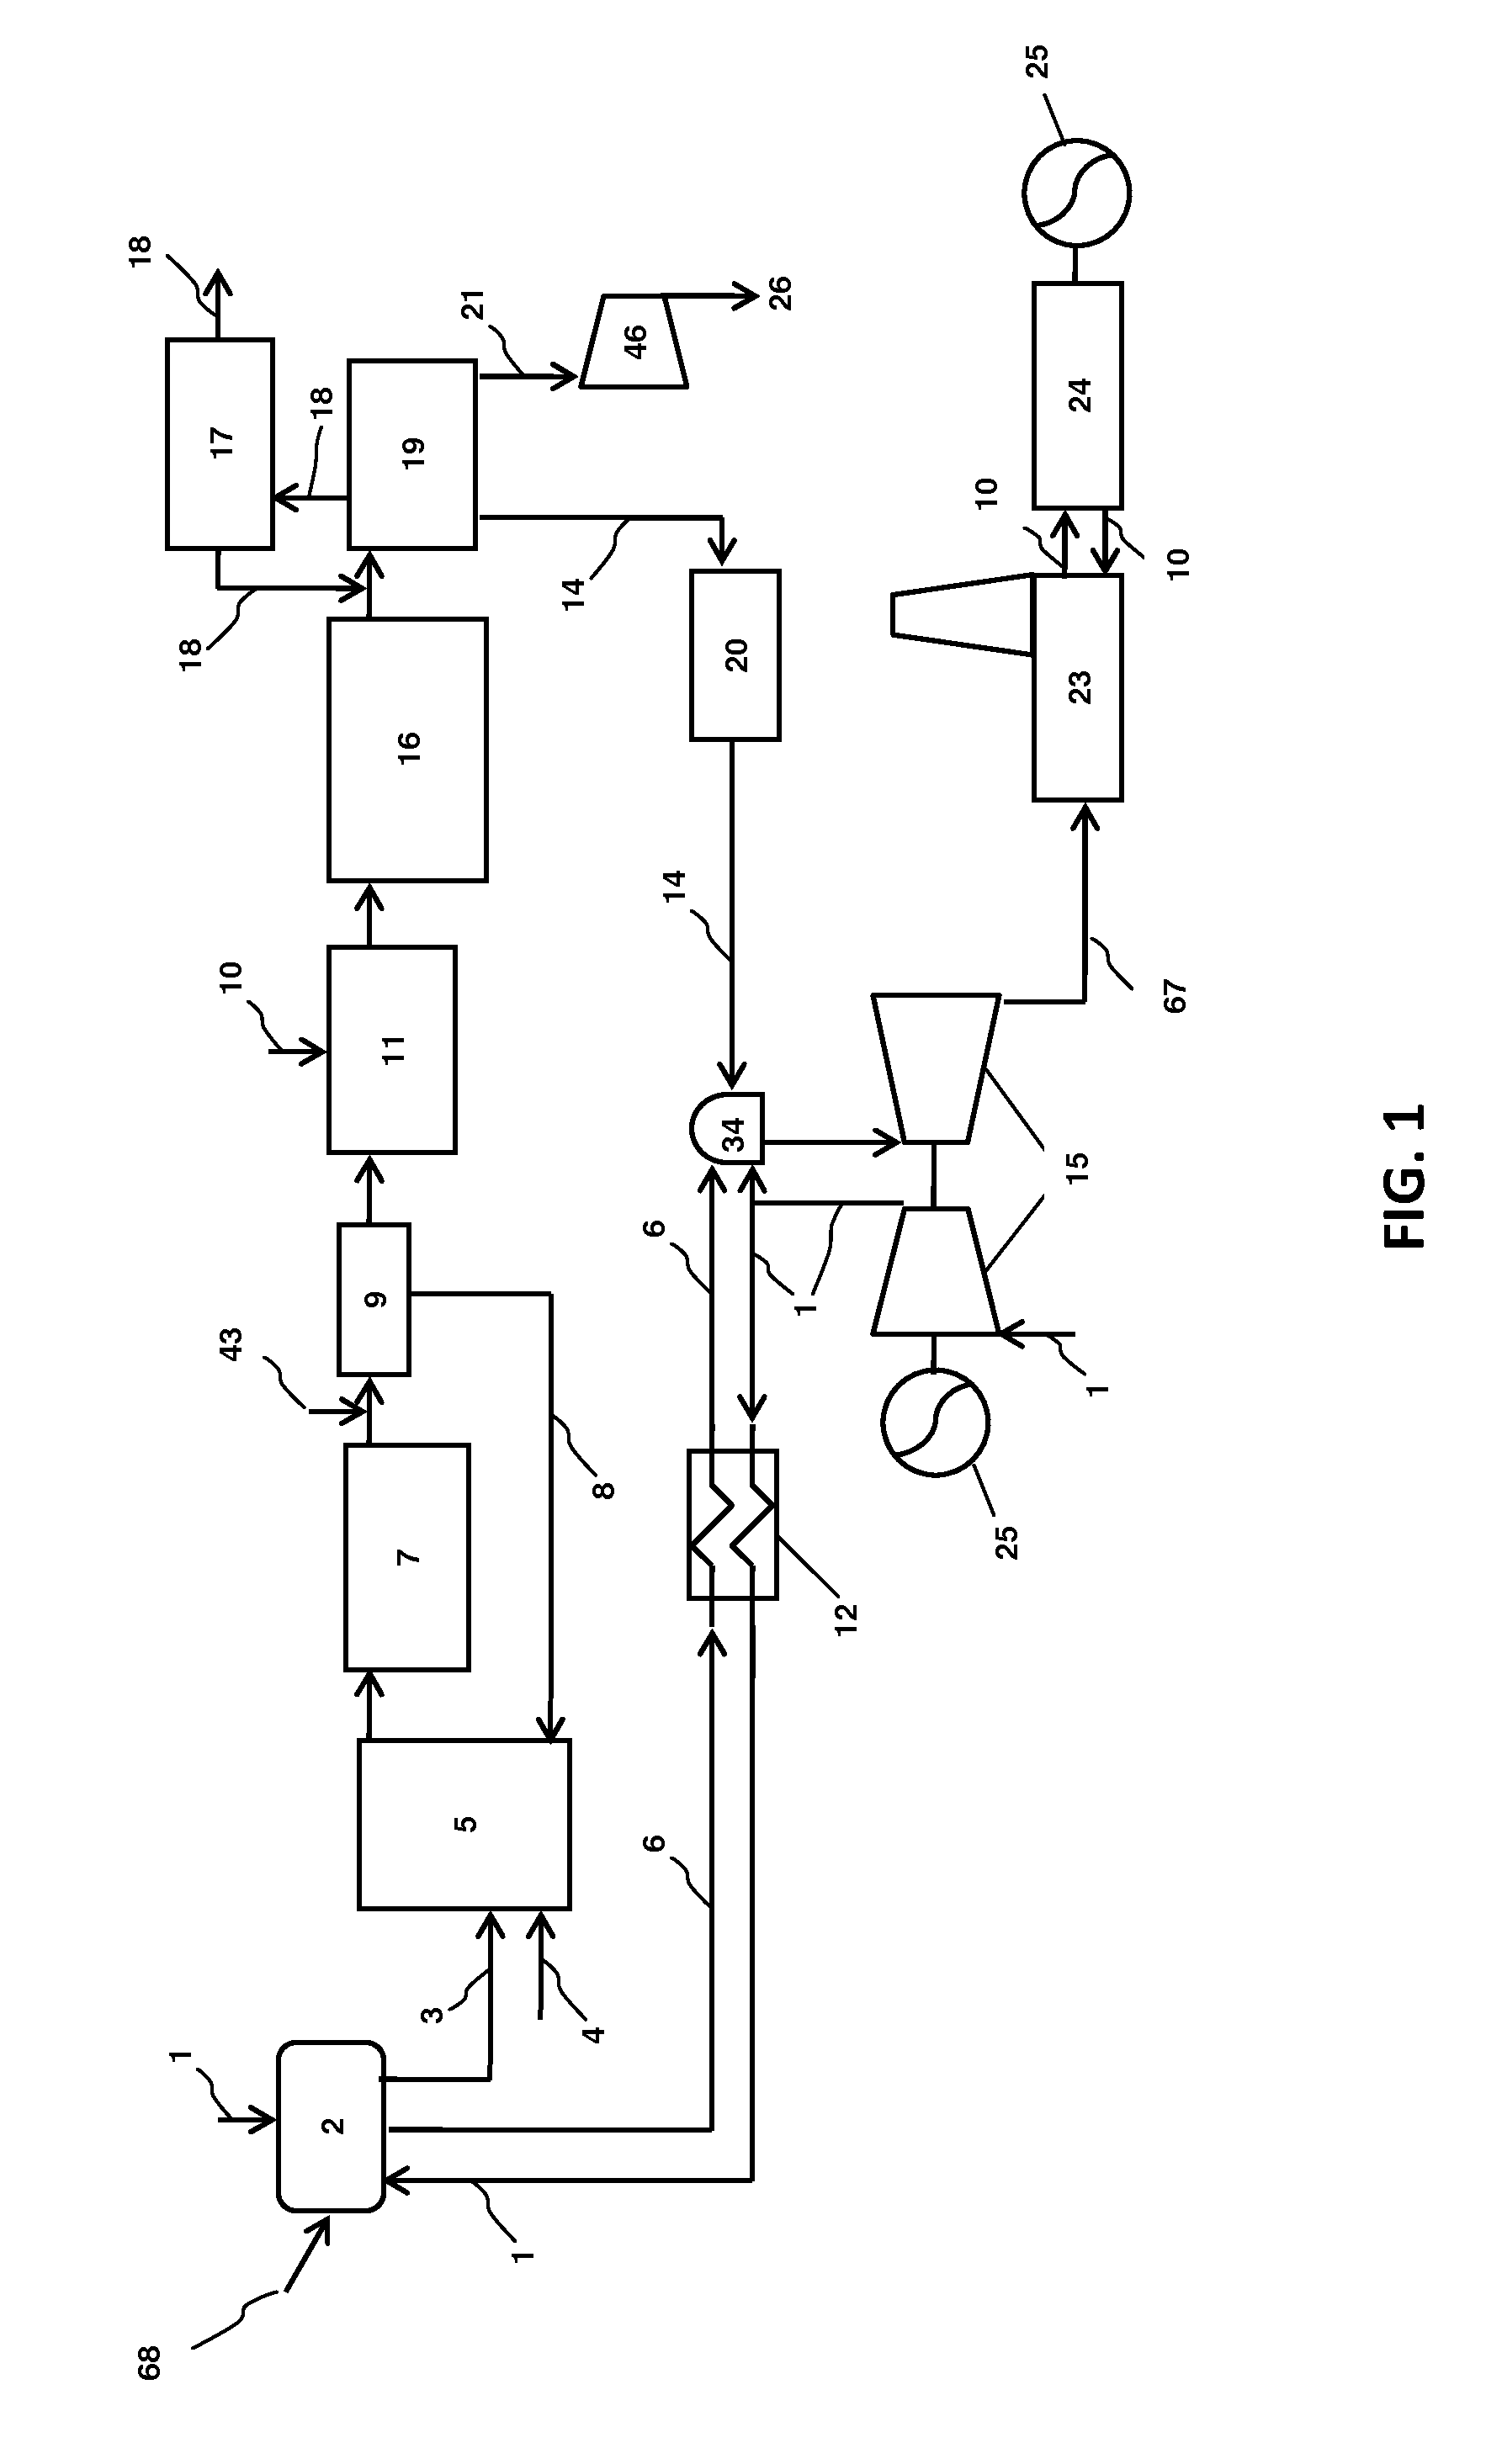 Efficient low rank coal gasification, combustion, and processing systems and methods